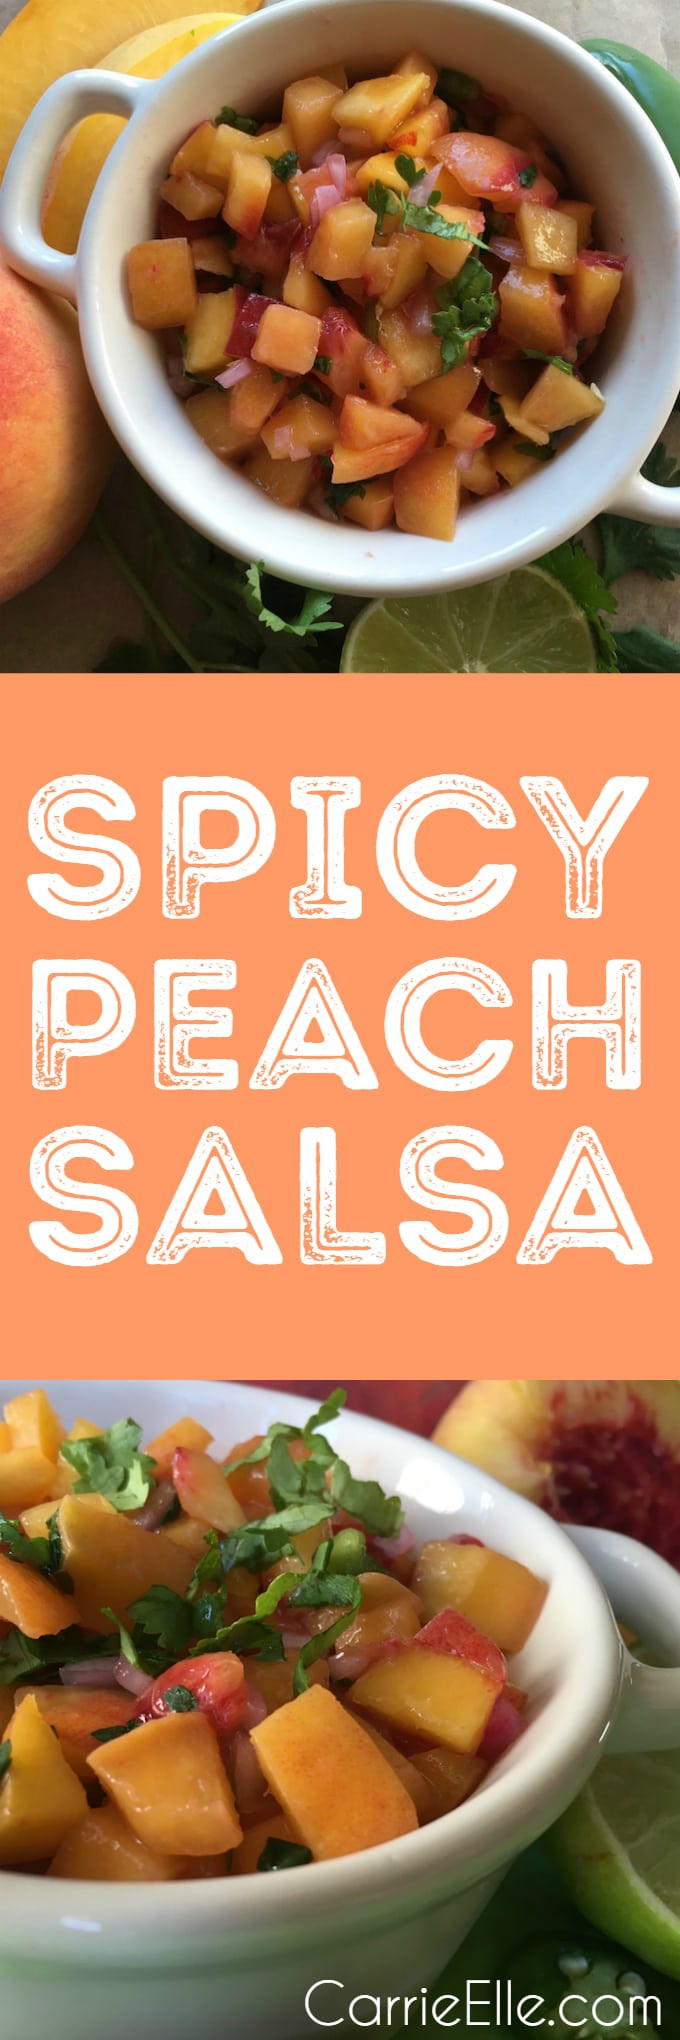 Salsa Recipe Spicy
 Spicy Peach Salsa 21 Day Fix and Weight Watchers approved